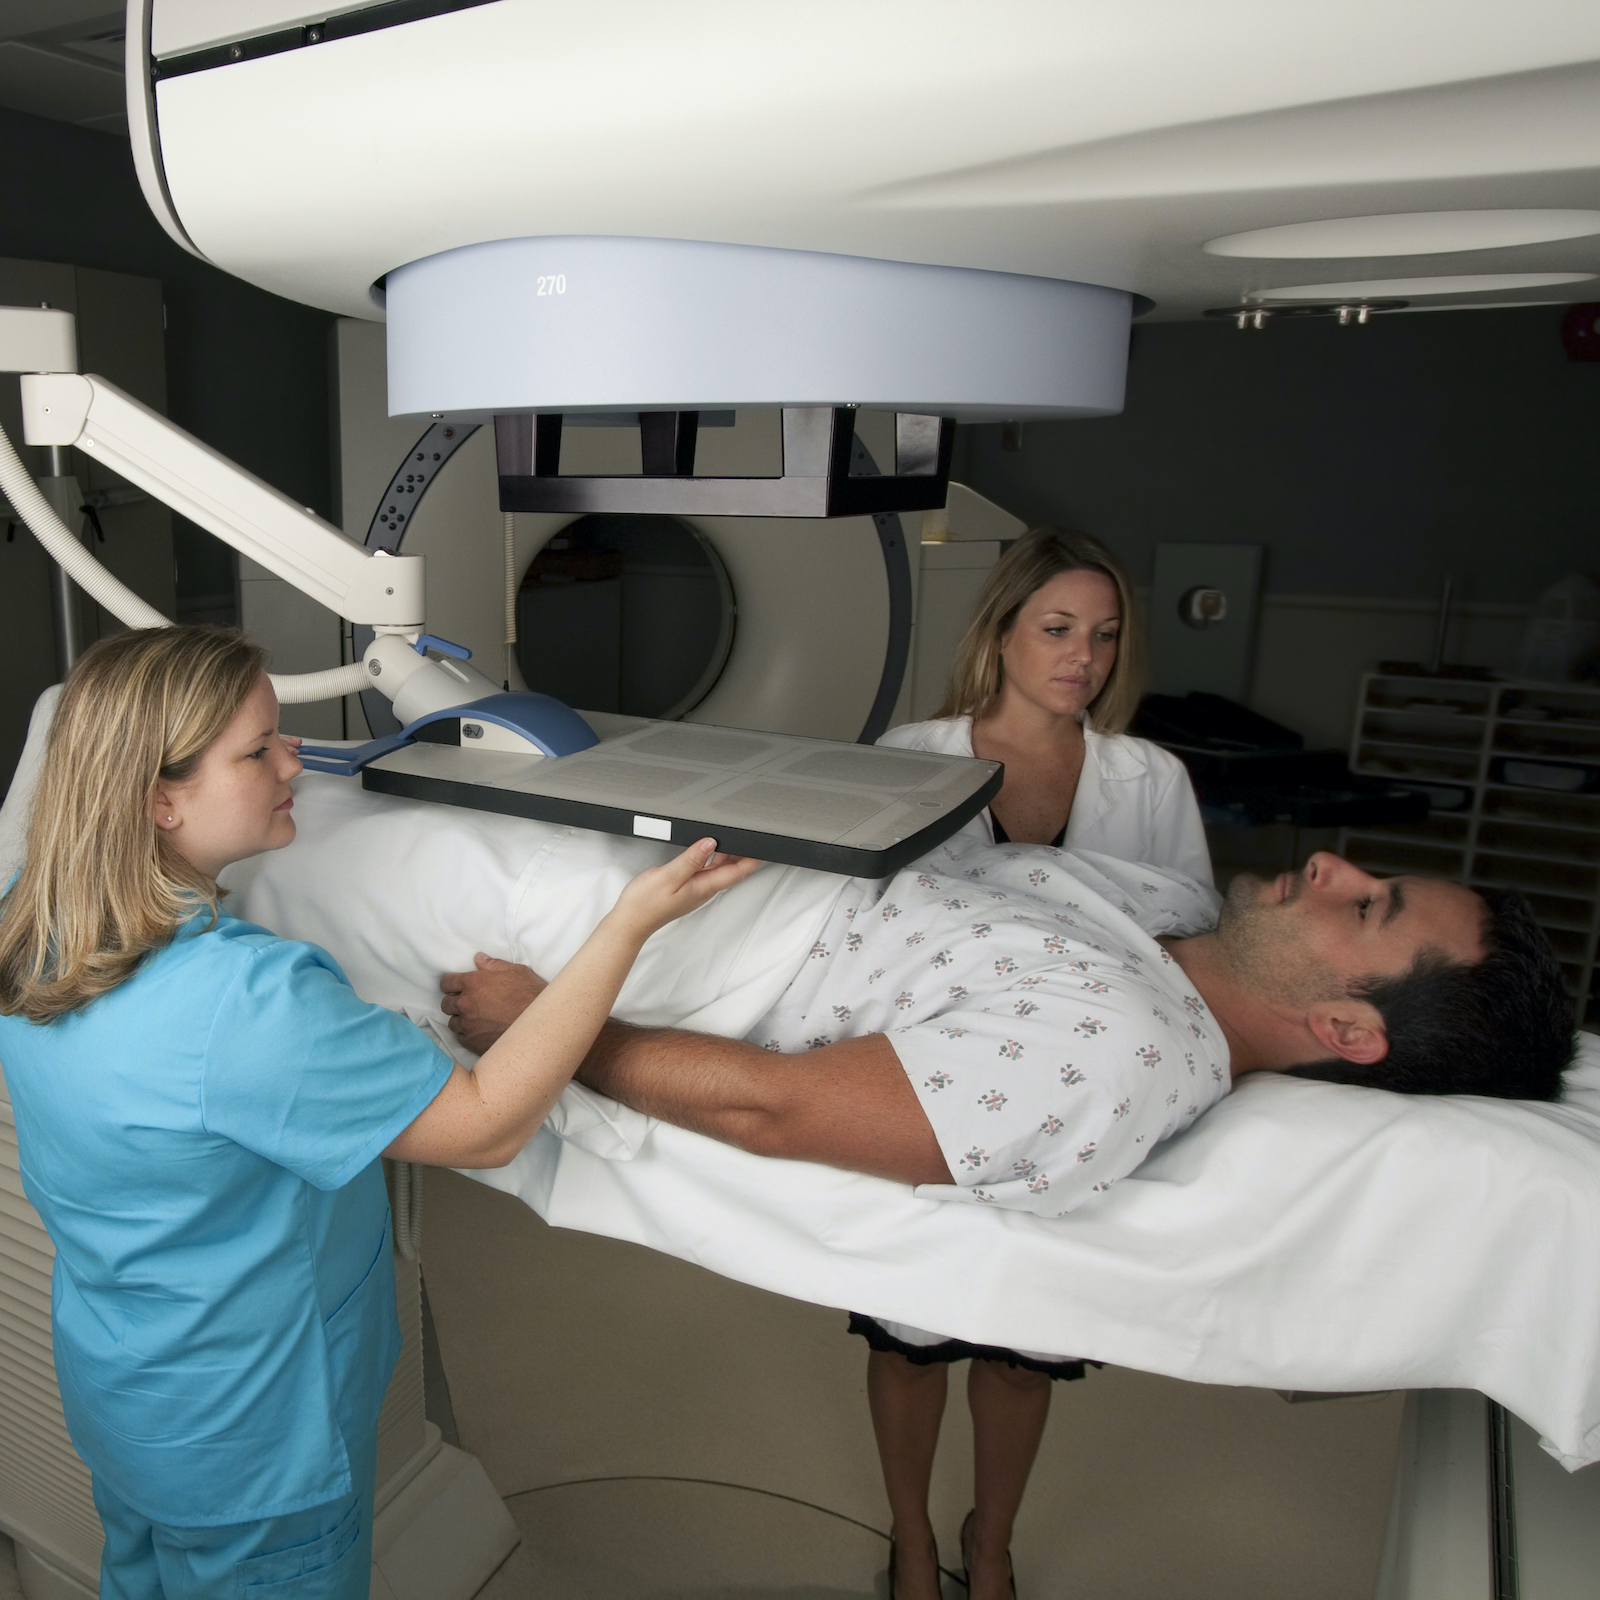 Debunking Common Myths About Radiation Treatment